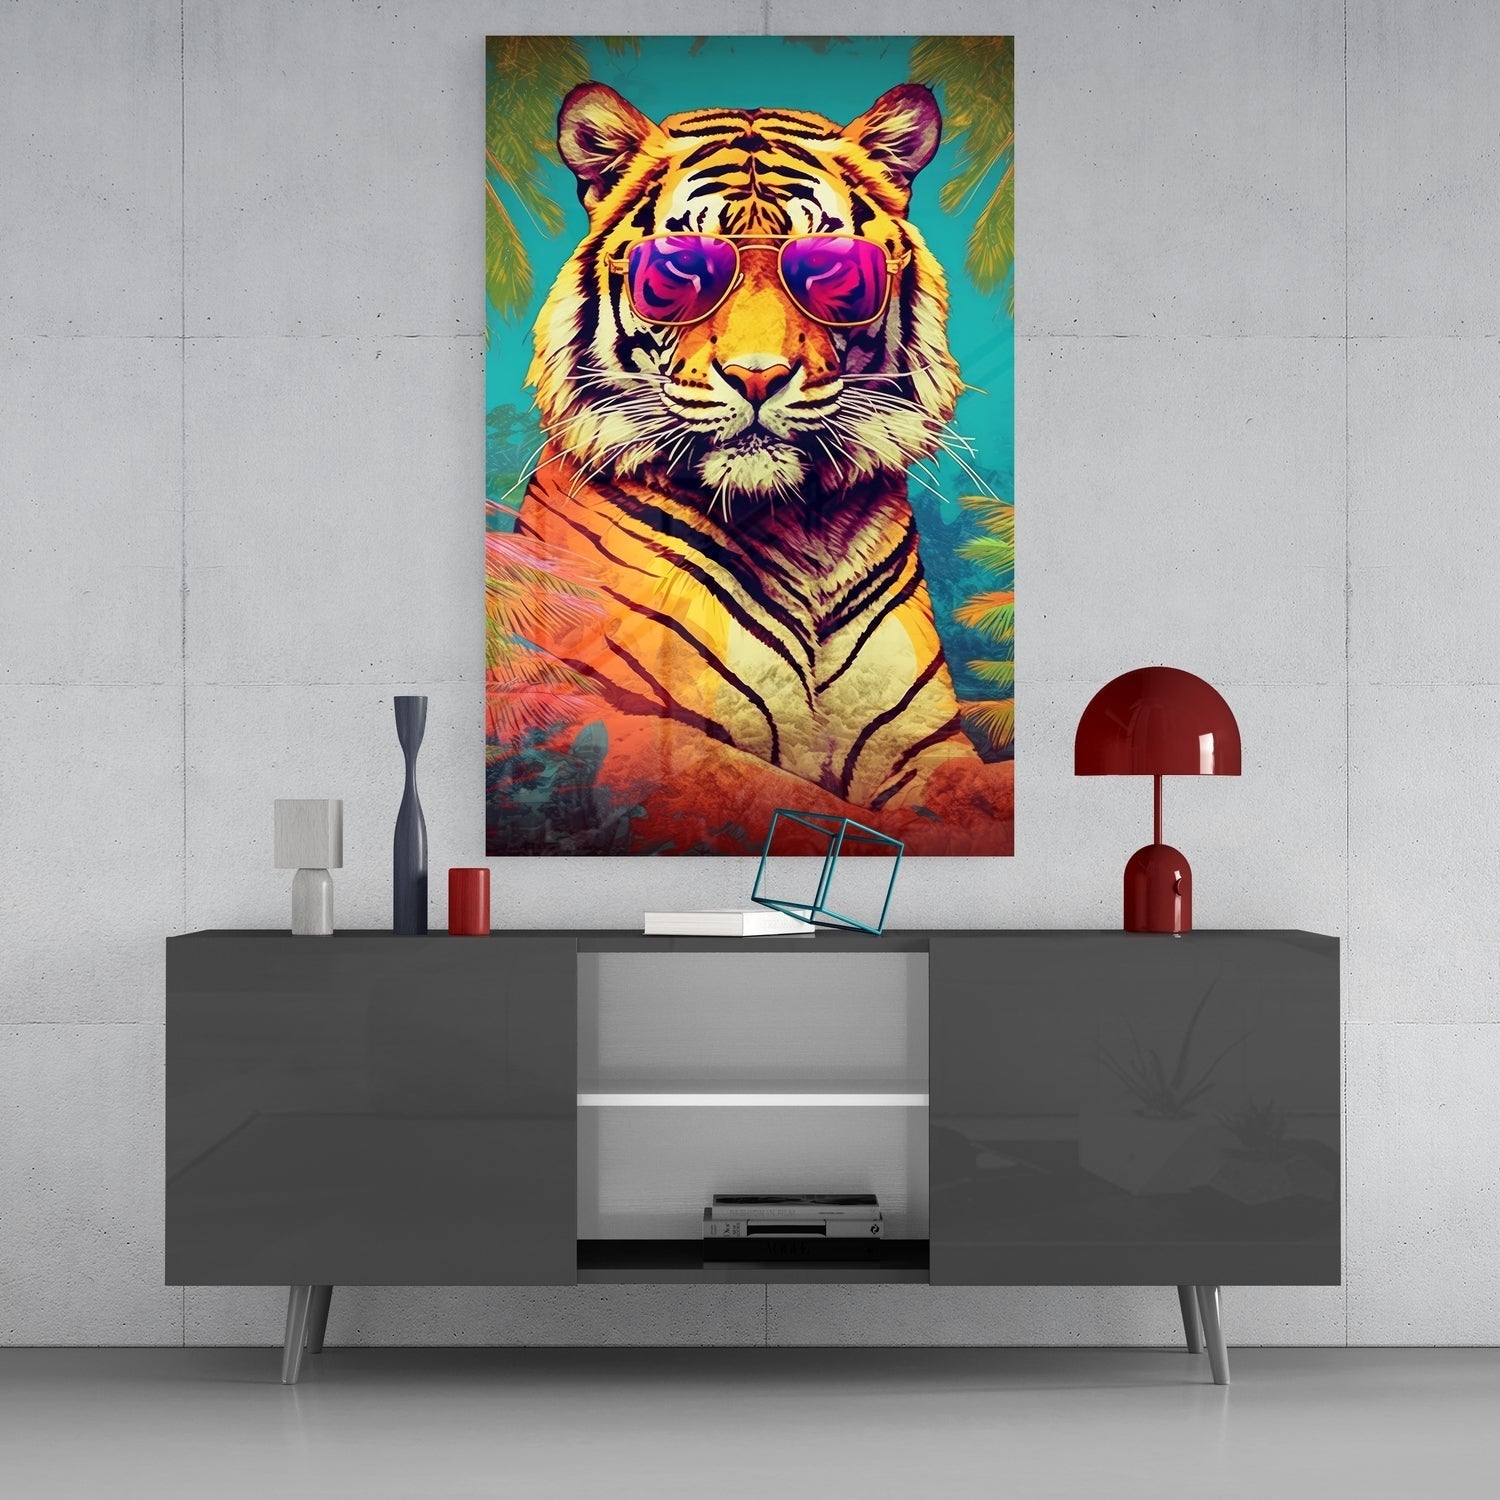 Cool Tiger Glass Wall Art || Designer Collection